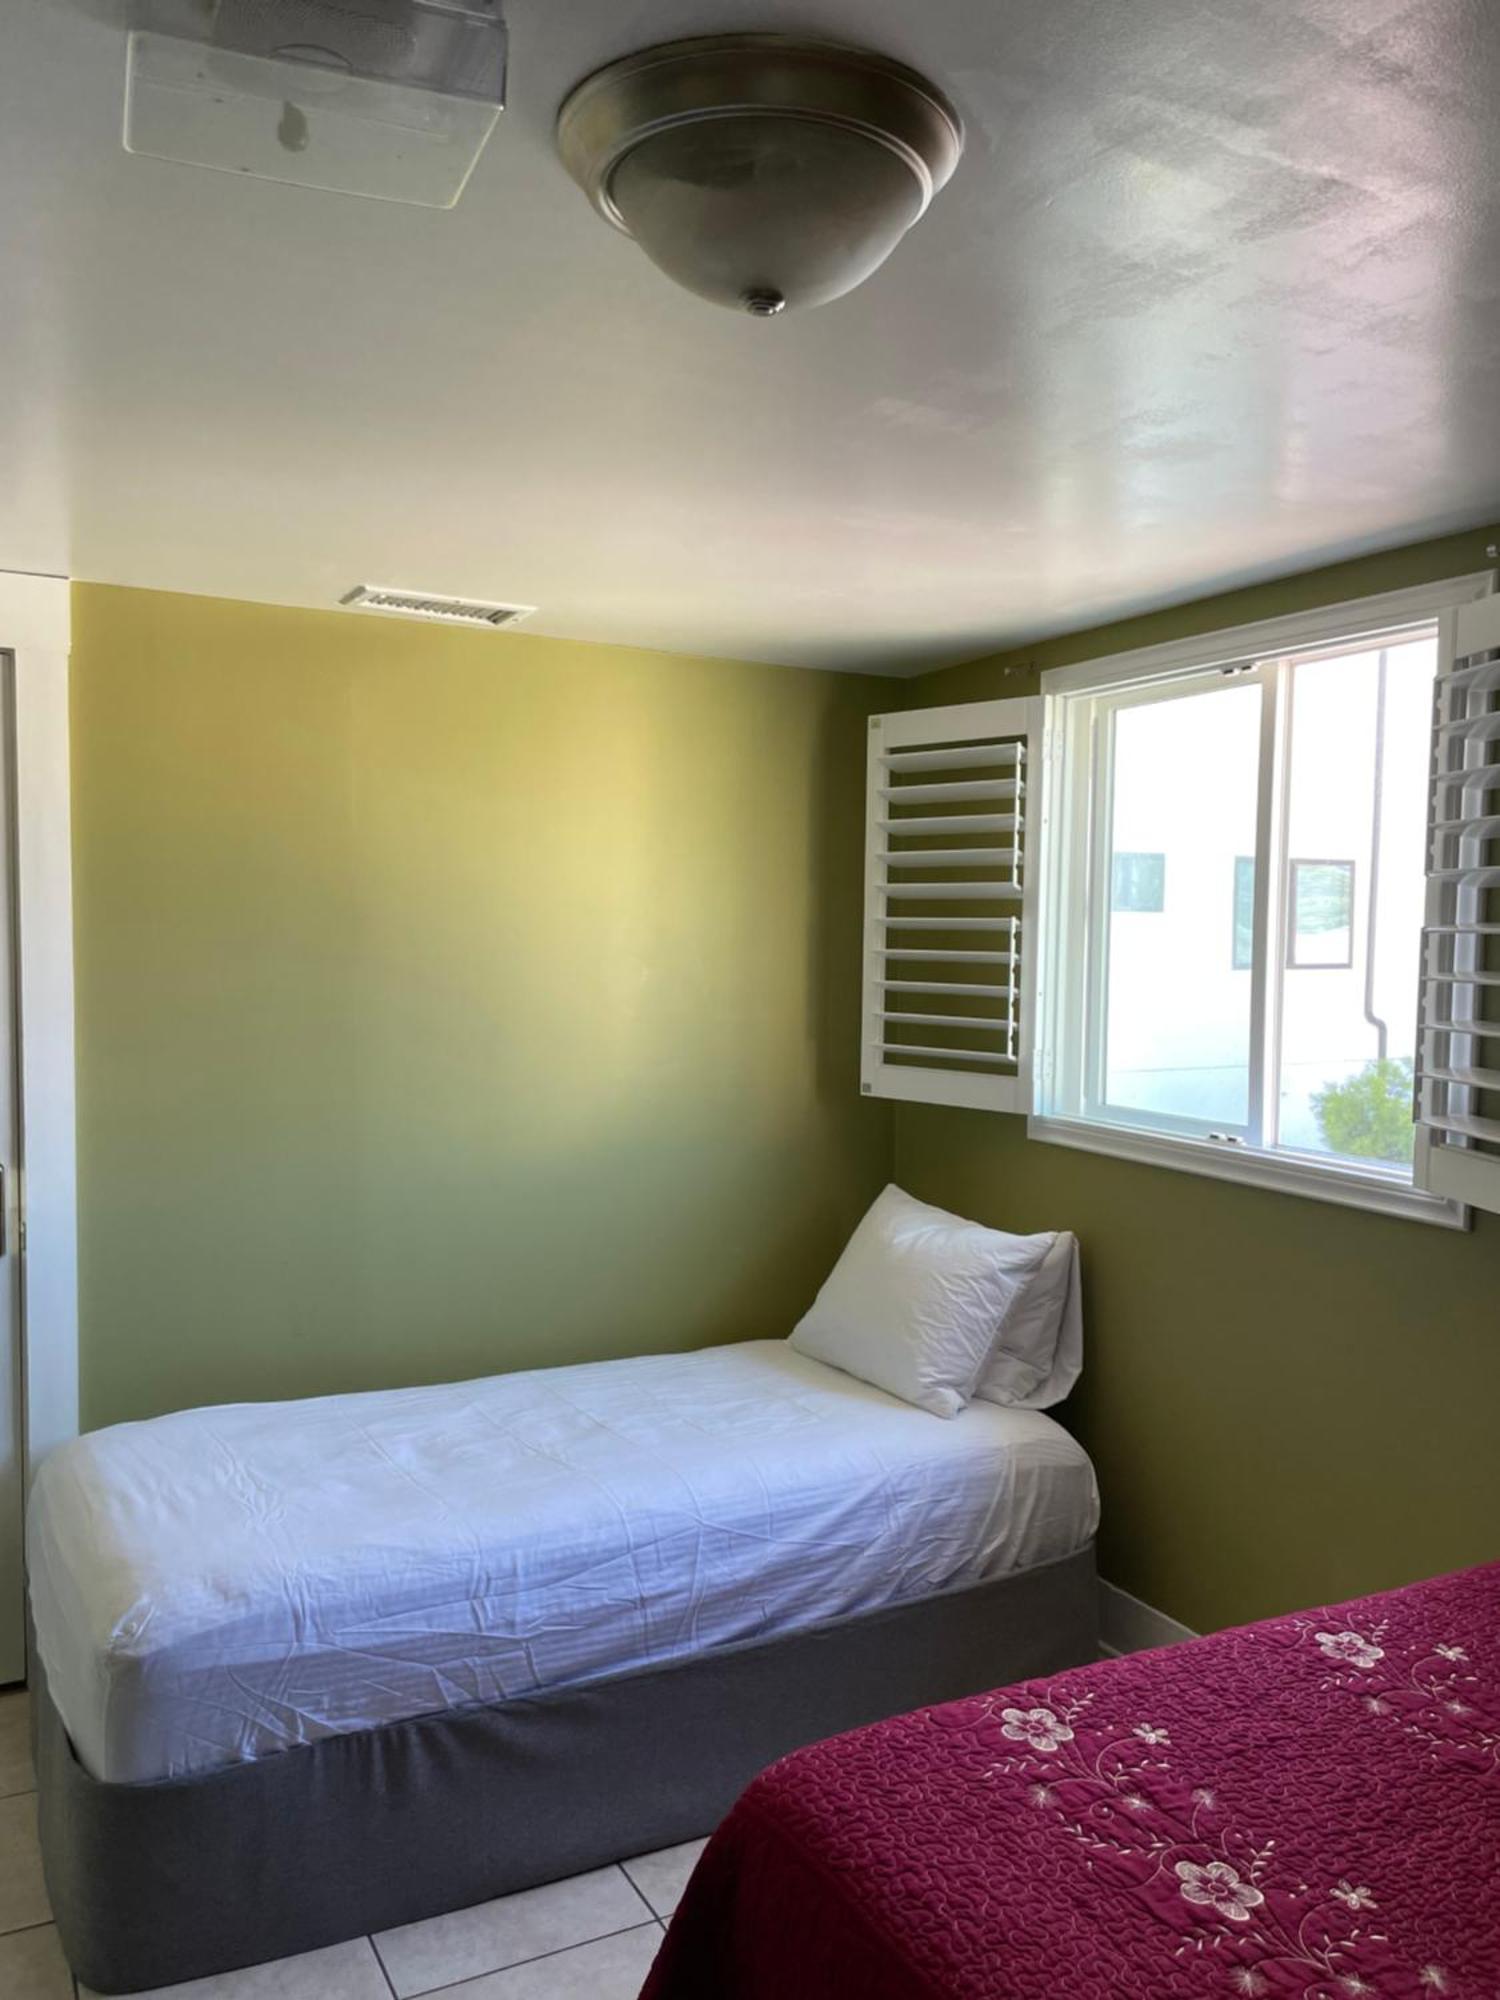 Spacious Private Los Angeles Bedroom With Ac & Wifi & Private Fridge Near Usc The Coliseum Exposition Park Bmo Stadium University Of Southern California ภายนอก รูปภาพ